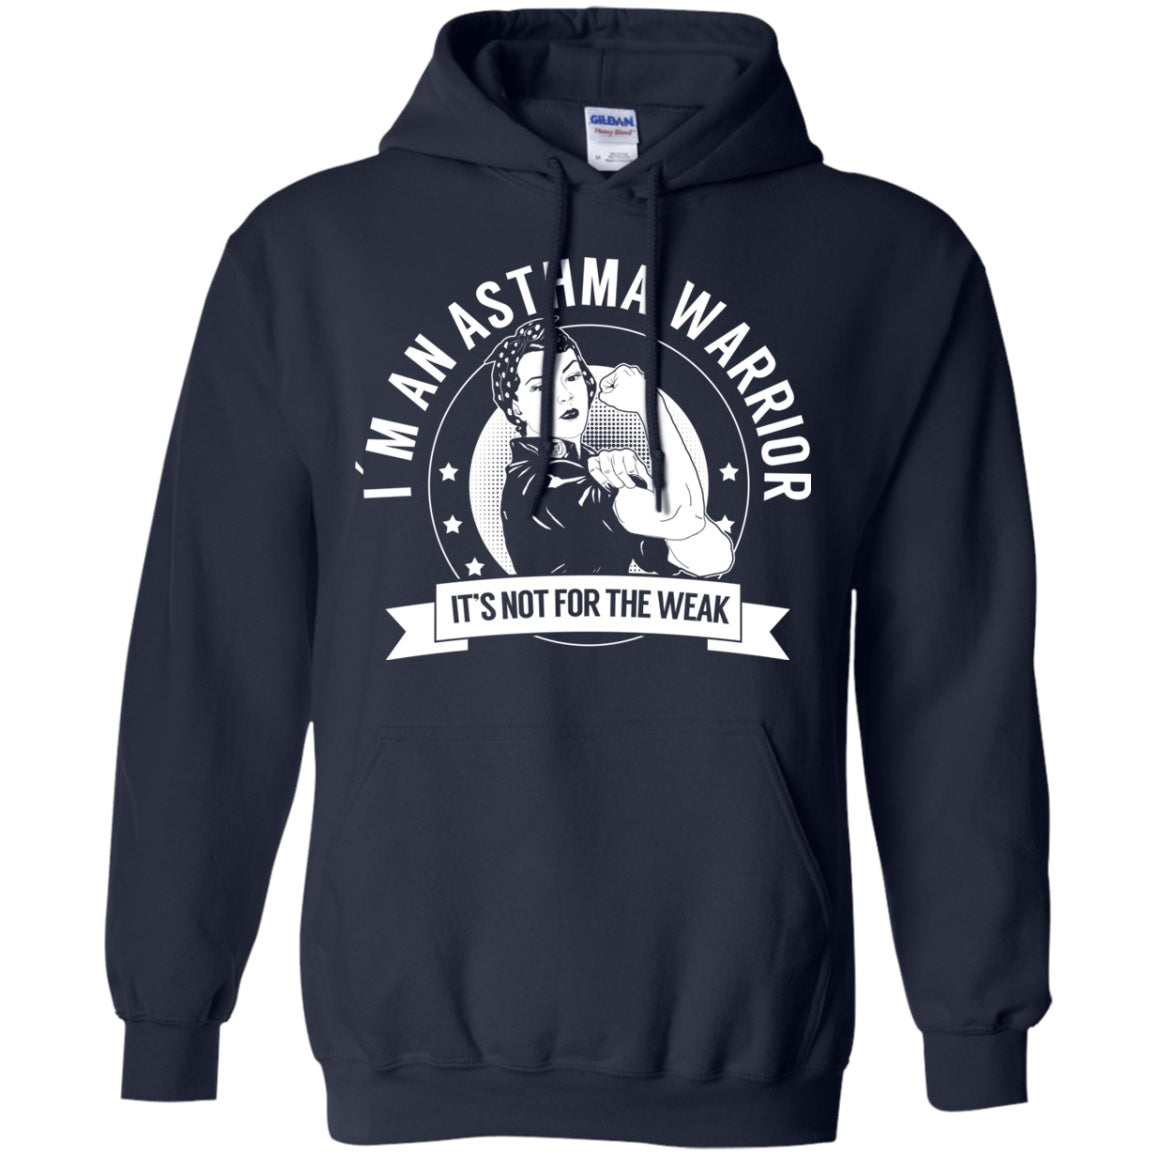 Asthma Warrior NFTW Pullover Hoodie 8 oz. - The Unchargeables